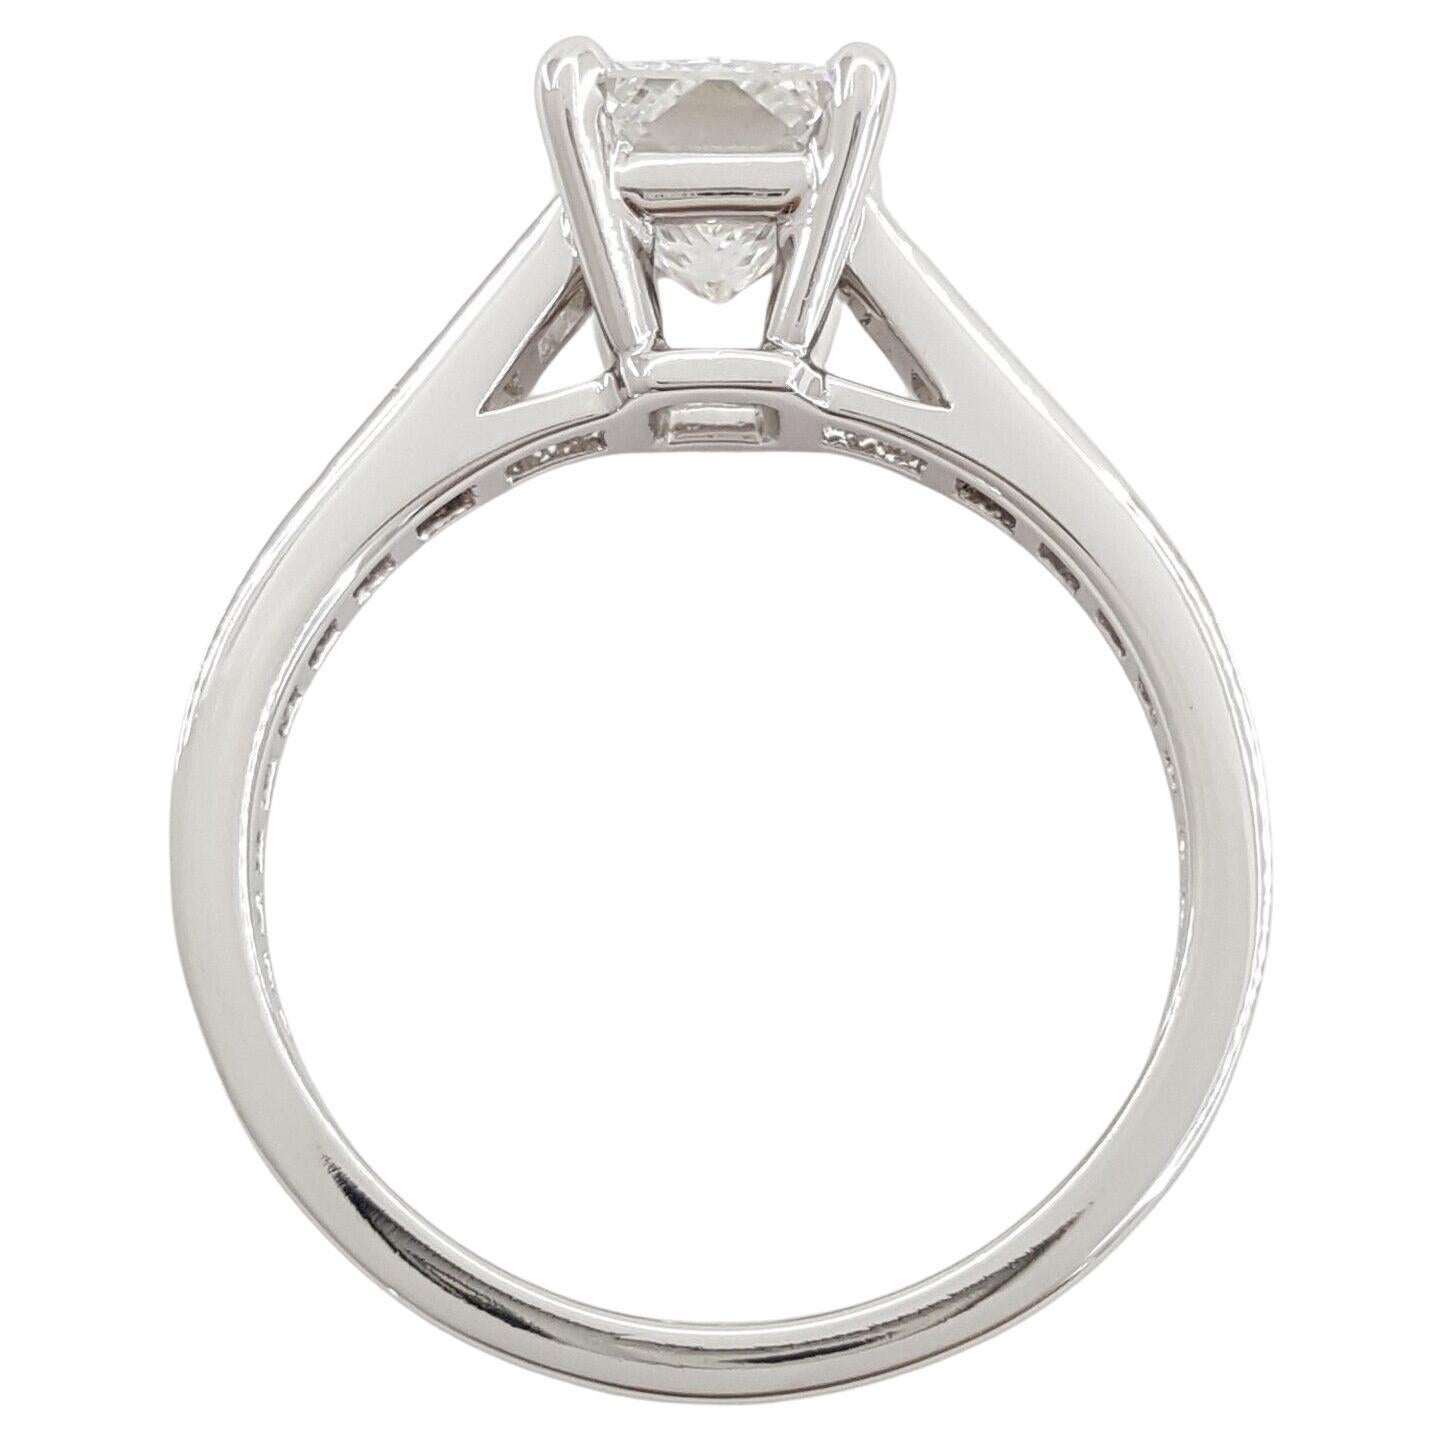 This is a Cartier Solitaire 1895 Platinum Rectangular Radiant Brilliant Cut Diamond Engagement Ring, weighing 5.5 grams and sized at 5.25 (French 50). The centerpiece is a remarkable 2.06 ct Natural Rectangular Radiant Cut diamond with a grade of F